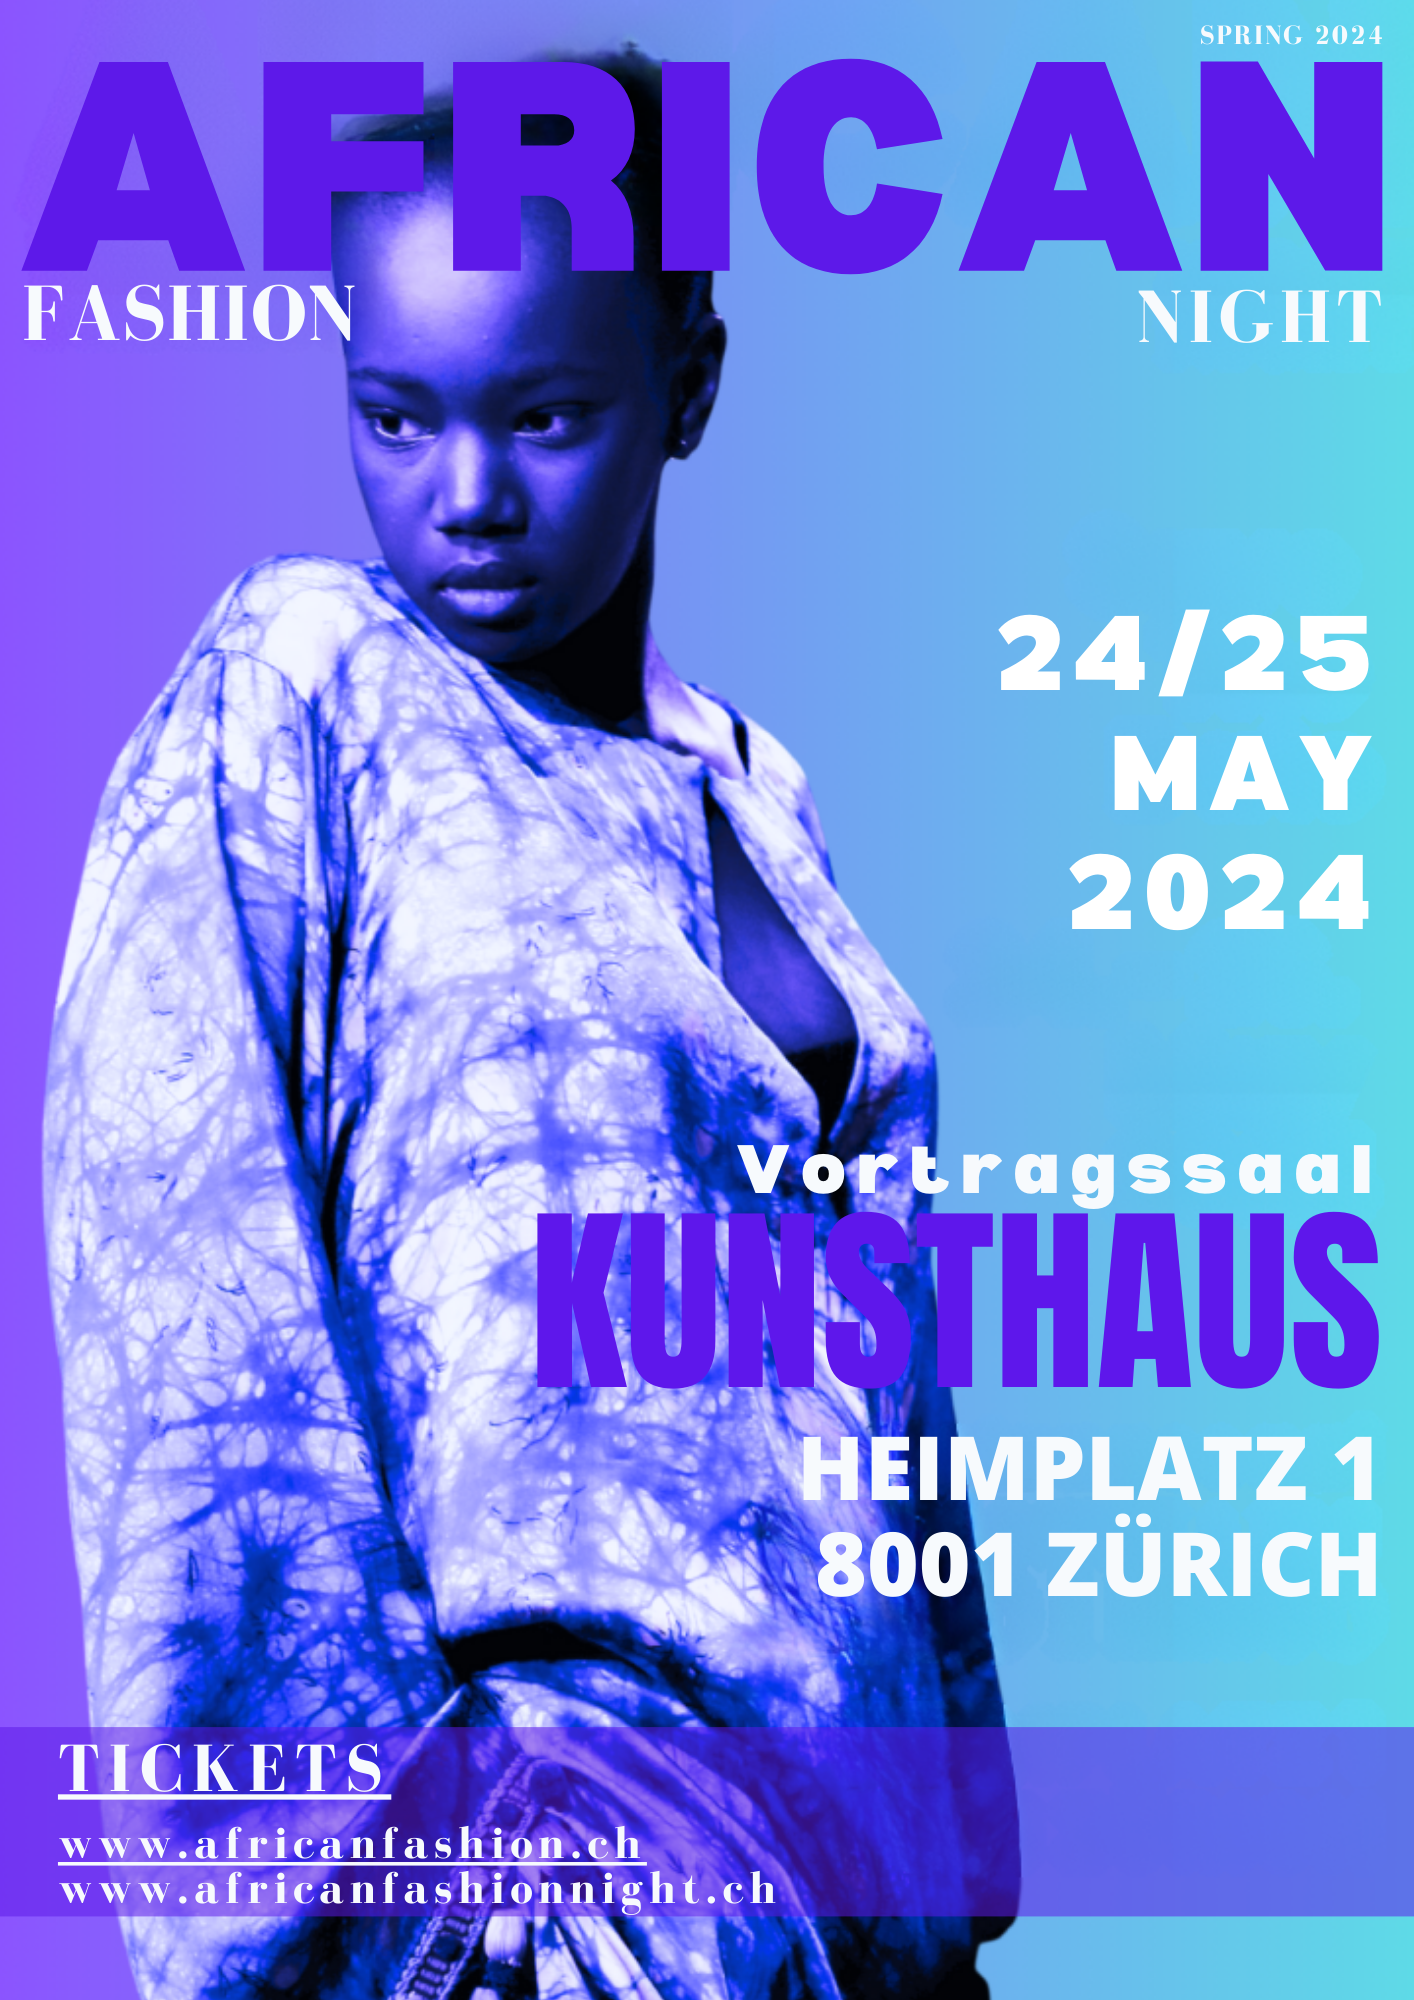 25 May - Fashion Show & Afterparty - Main Event